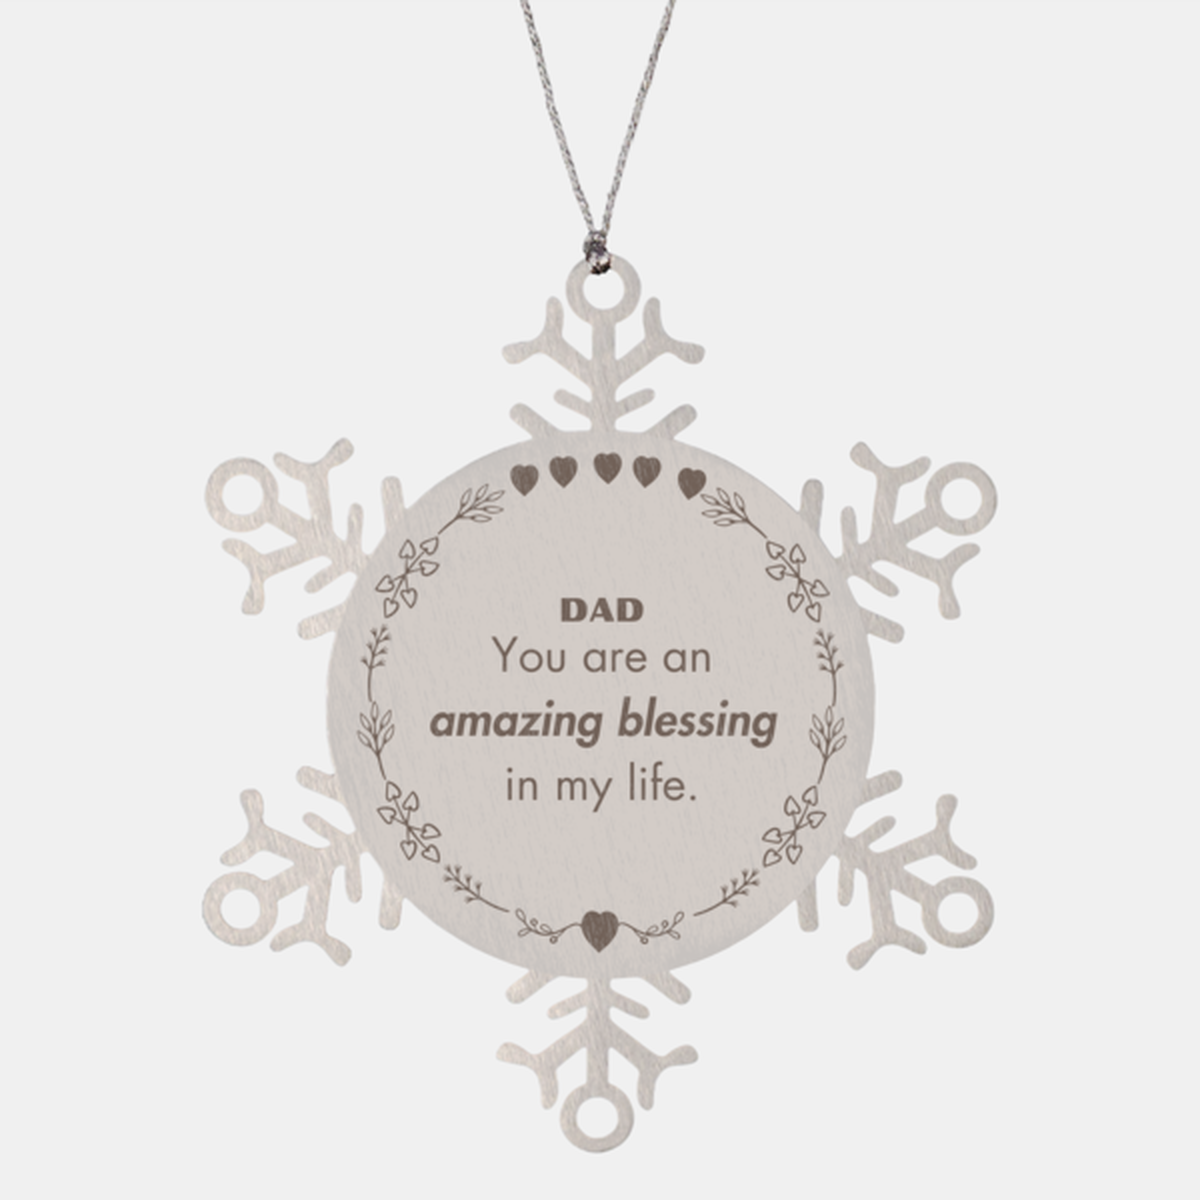 Dad Snowflake Ornament, You are an amazing blessing in my life, Thank You Gifts For Dad, Inspirational Birthday Christmas Unique Gifts For Dad